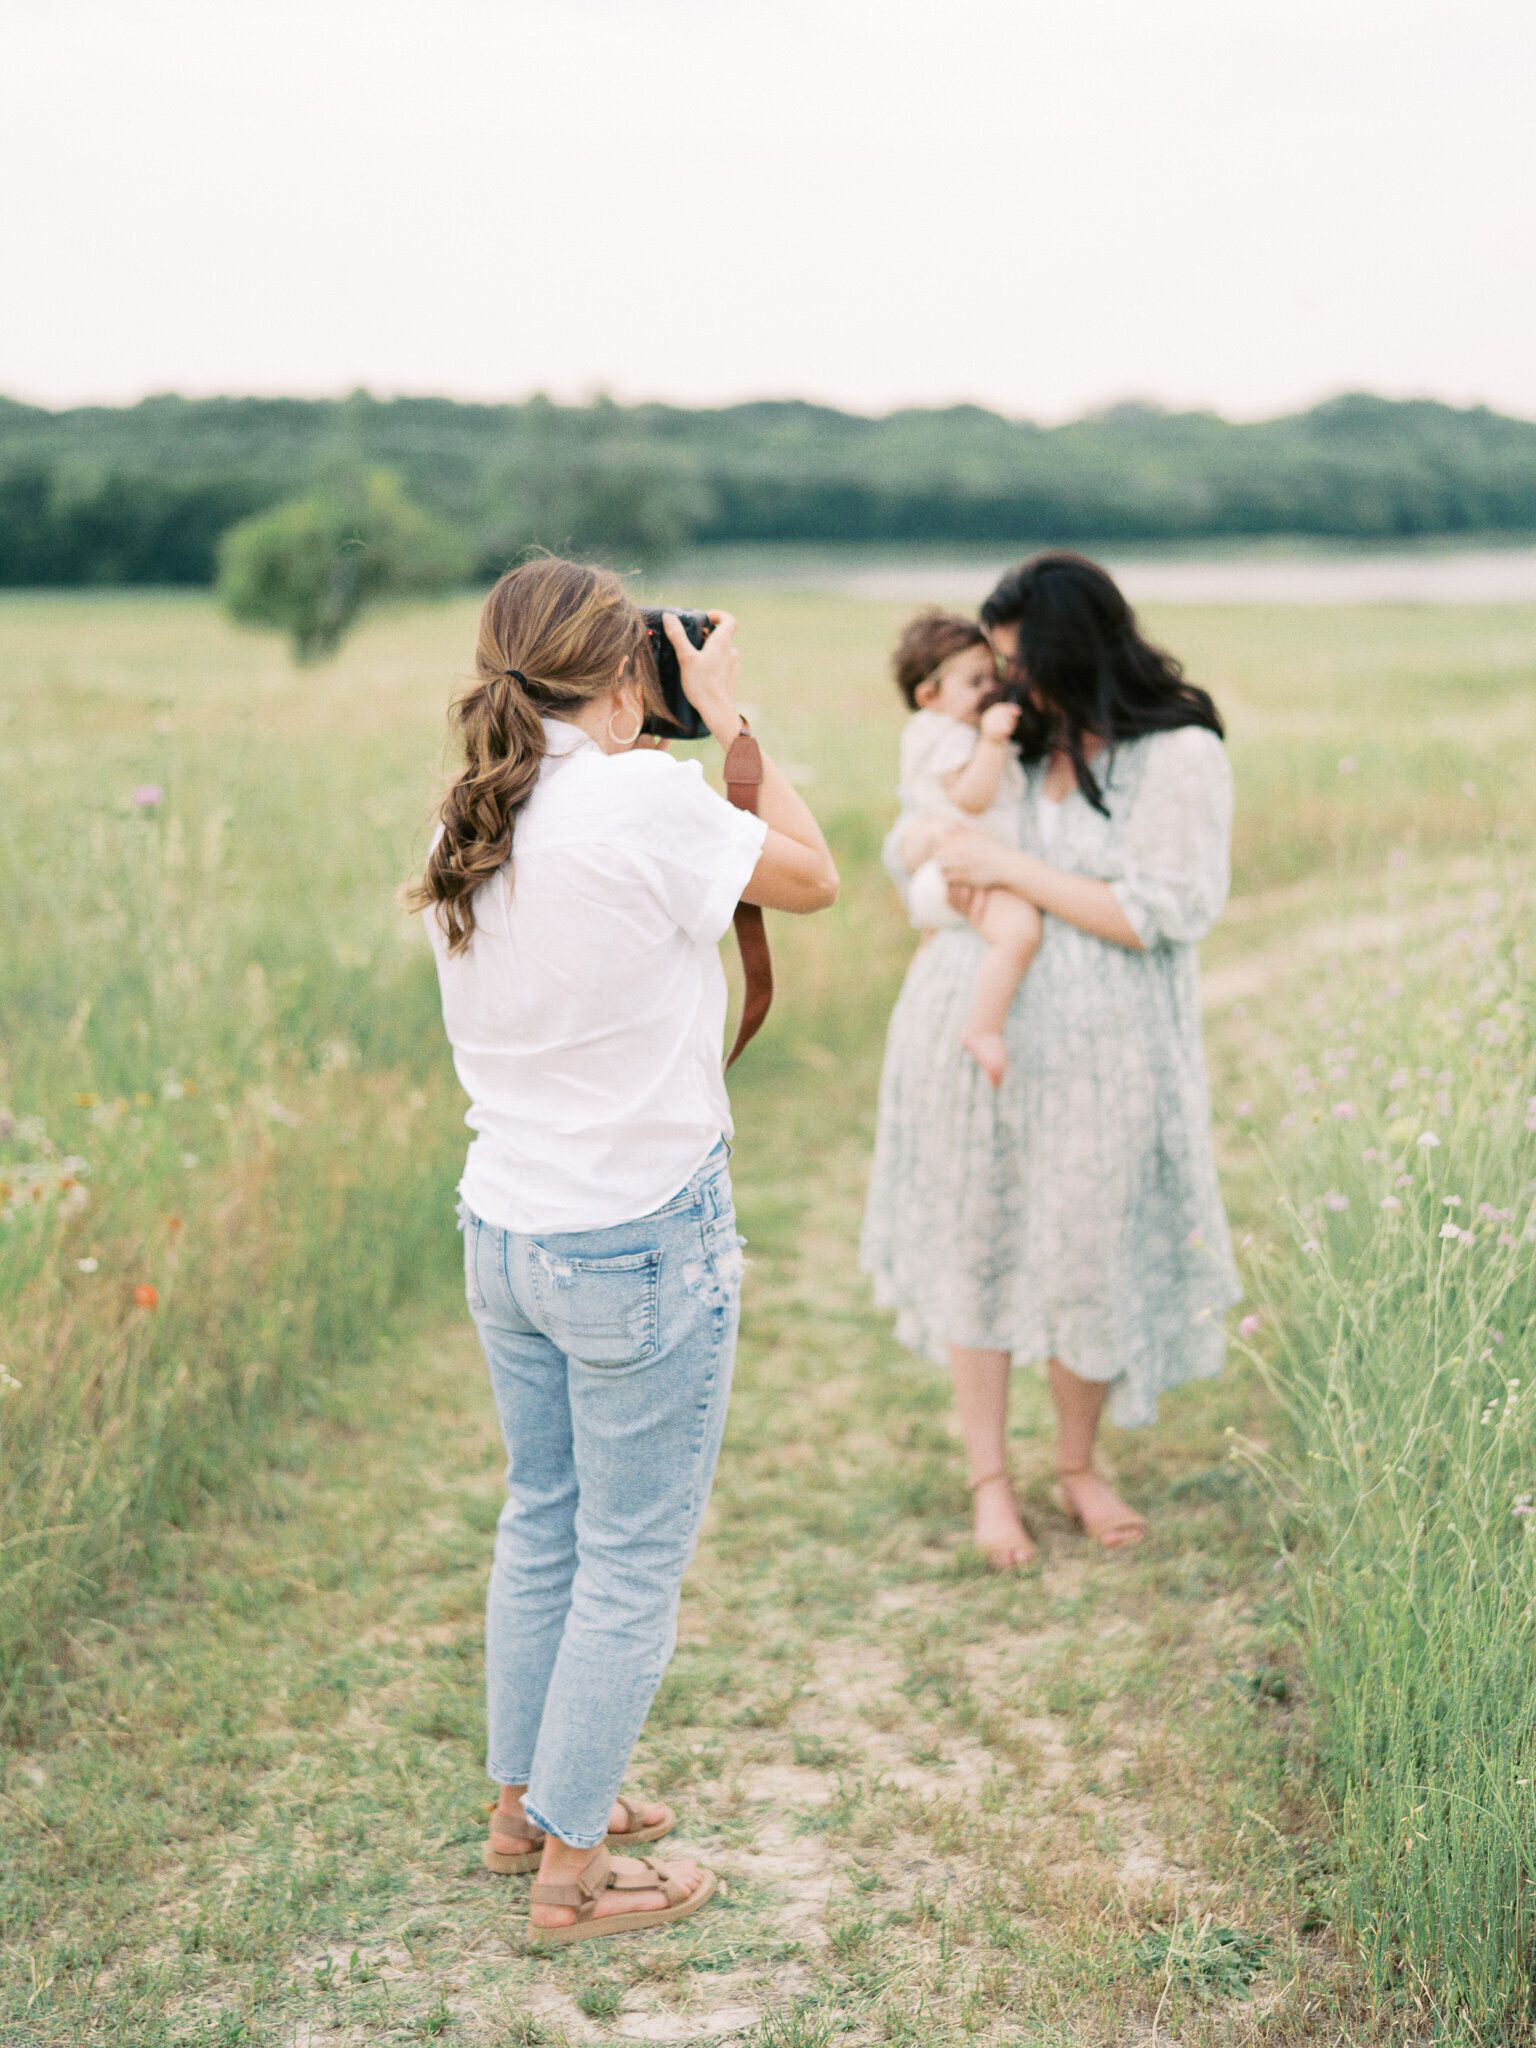 Little Rock photographer Bailey Feeler takes photograph of brunette mother snuggling young daughter in field